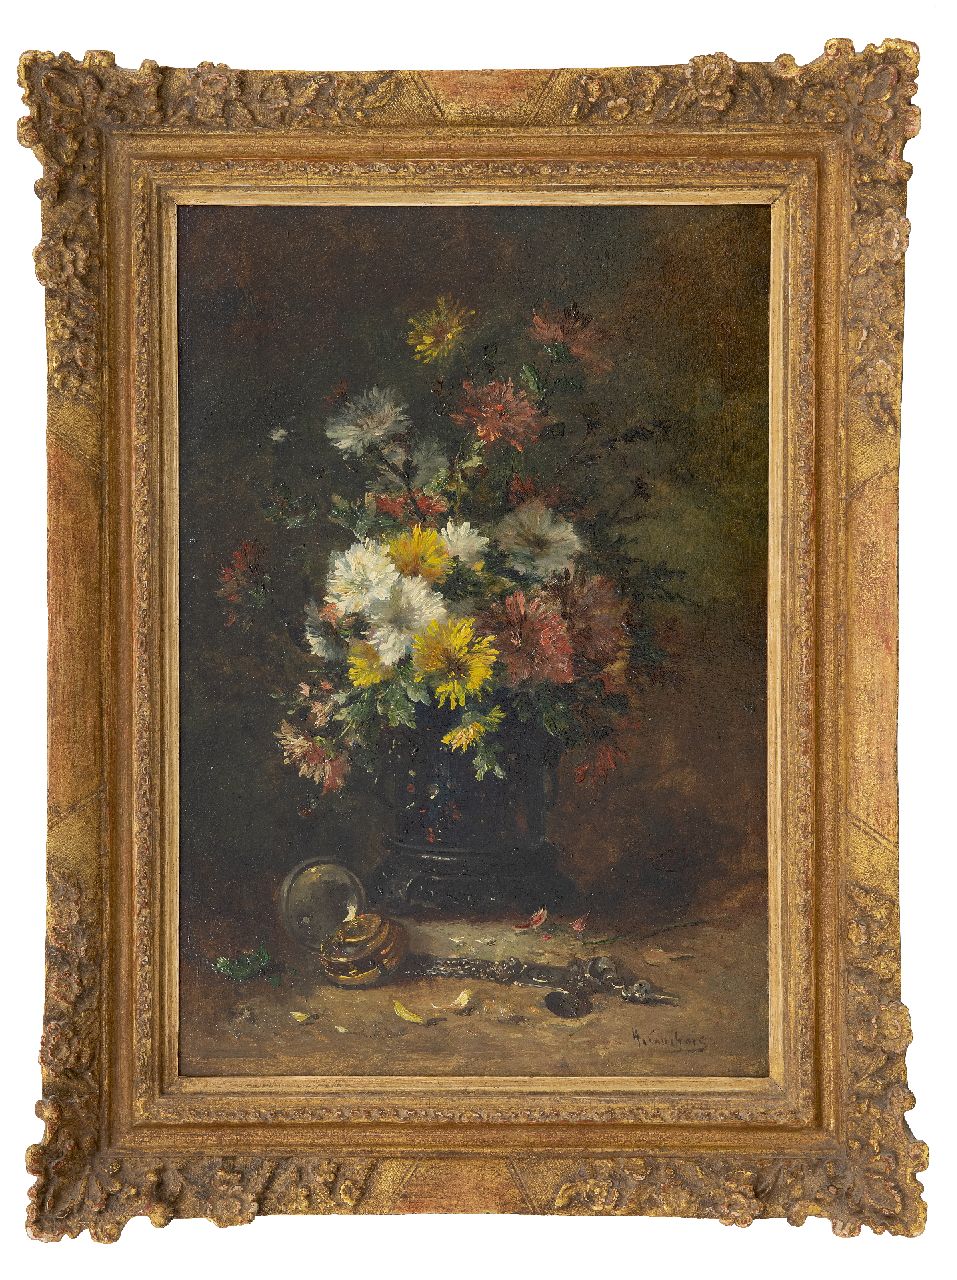 Cauchois E.H.  | Eugène-Henri Cauchois | Paintings offered for sale | Still life with Asters, oil on panel 46.2 x 31.3 cm, signed l.r.